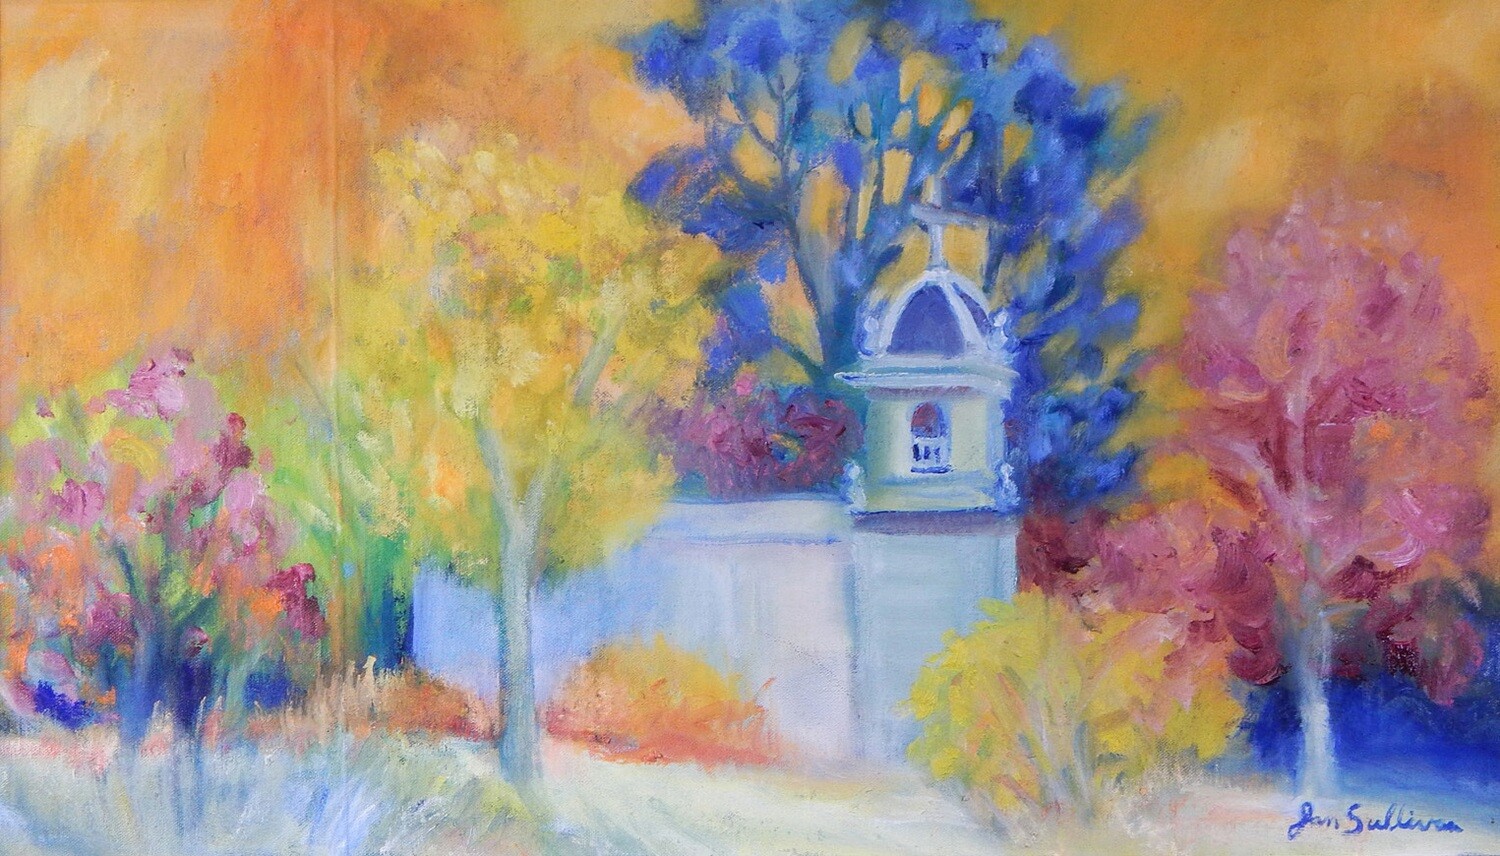 "Church in the Trees" Oil Painting, by Jan Sullivan